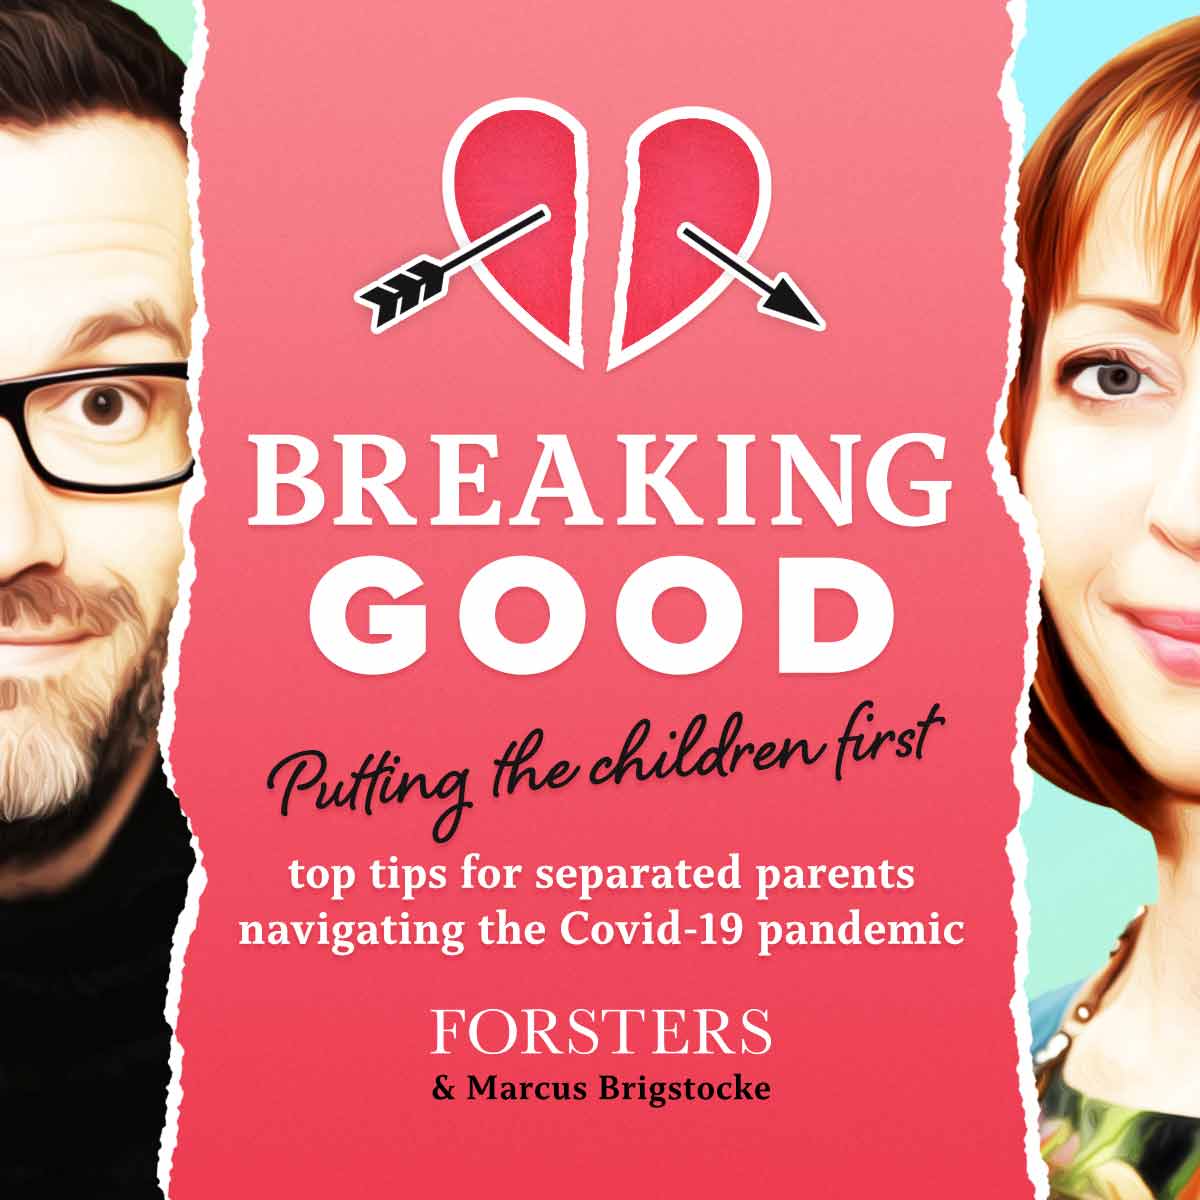 Breaking Good - Rethinking Separation and Divorce podcast graphic